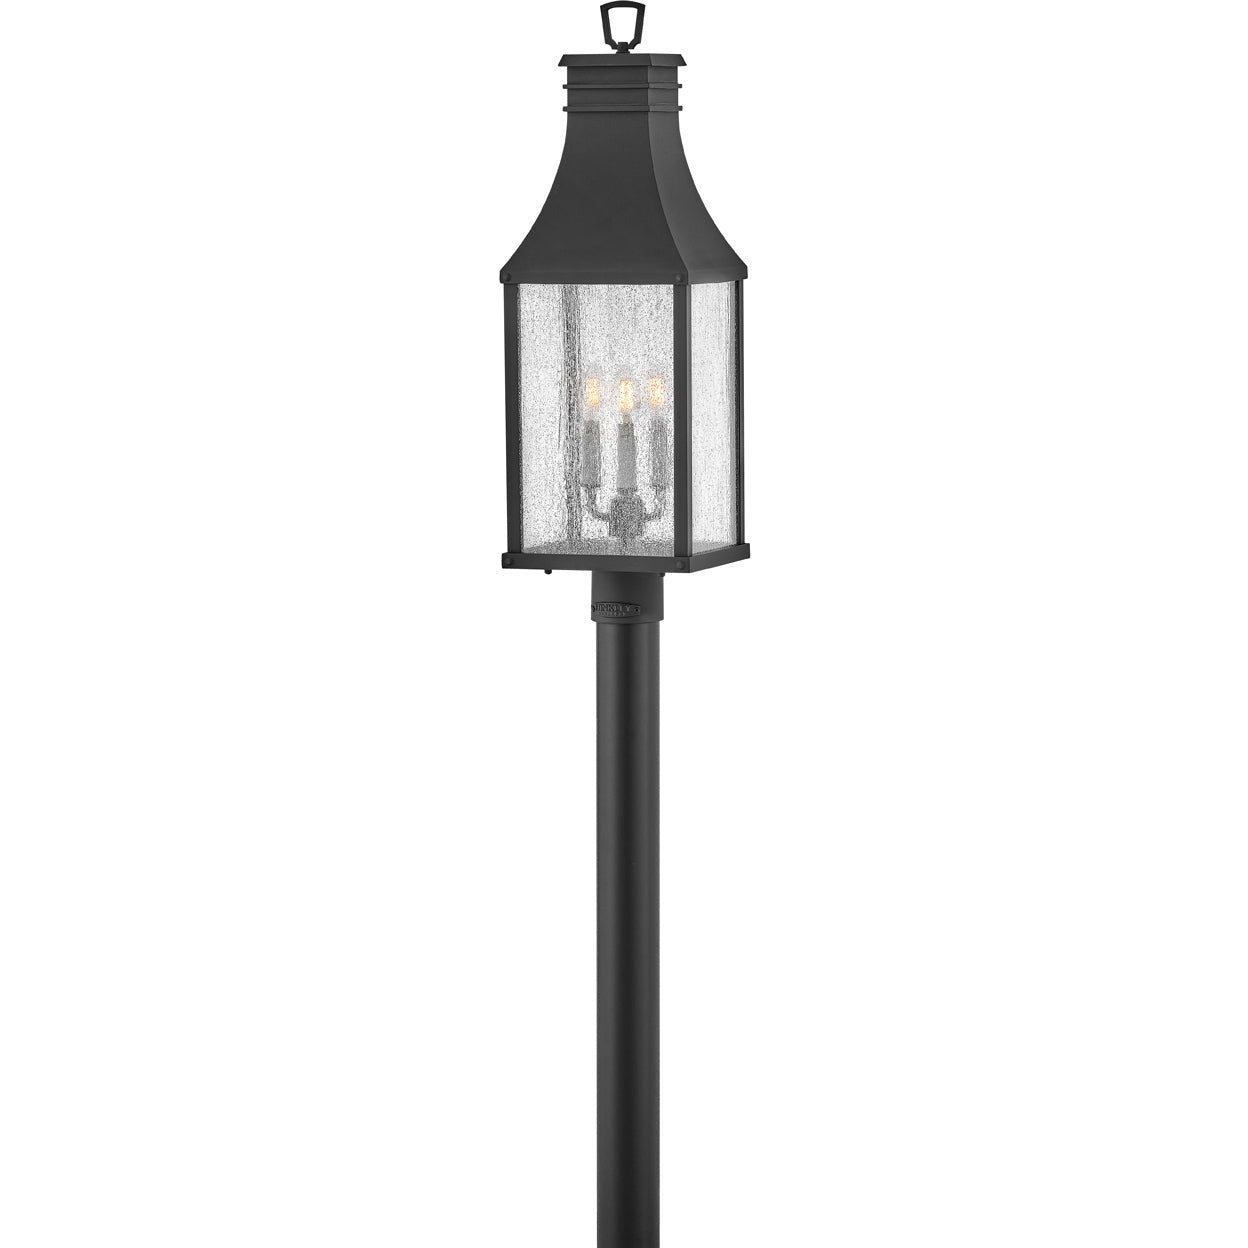 Beacon Hill Large Post Top or Pier Mount Lantern